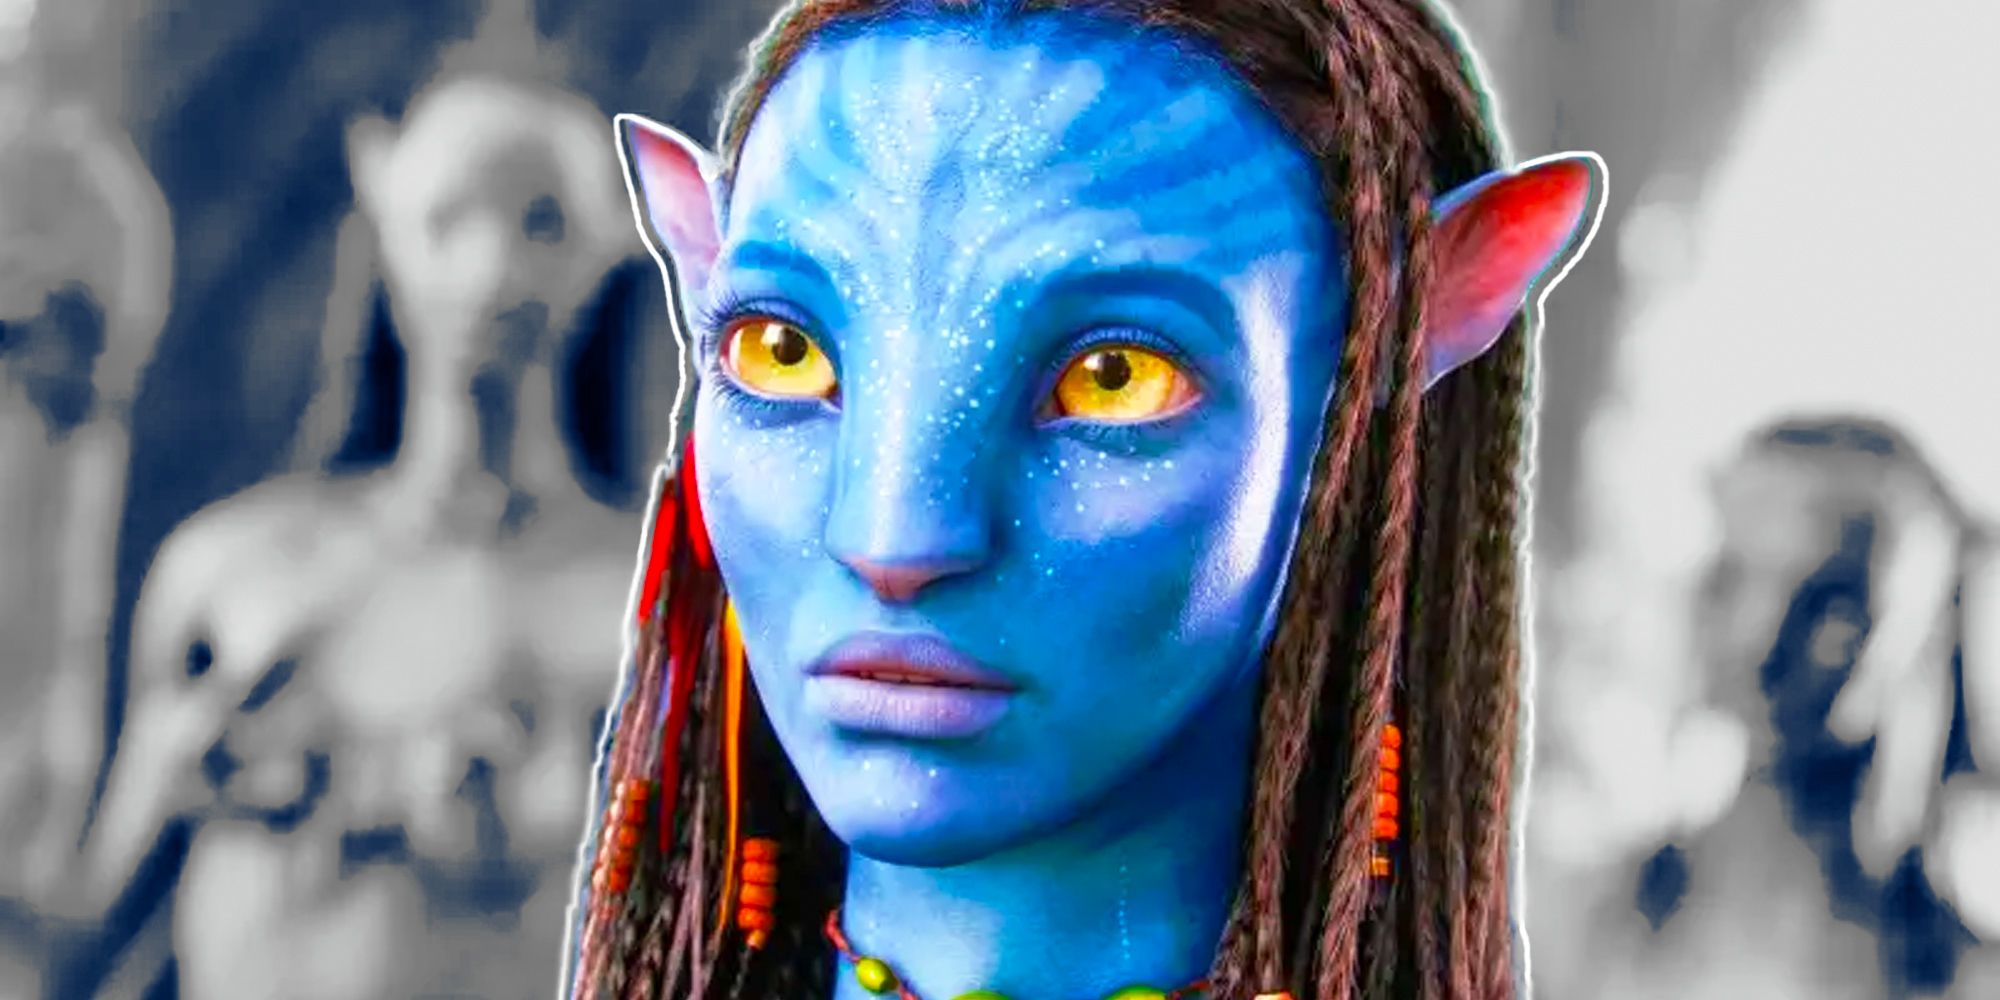 Avatar 2 sees Jake and Neytiri forced to leave their home teases producer